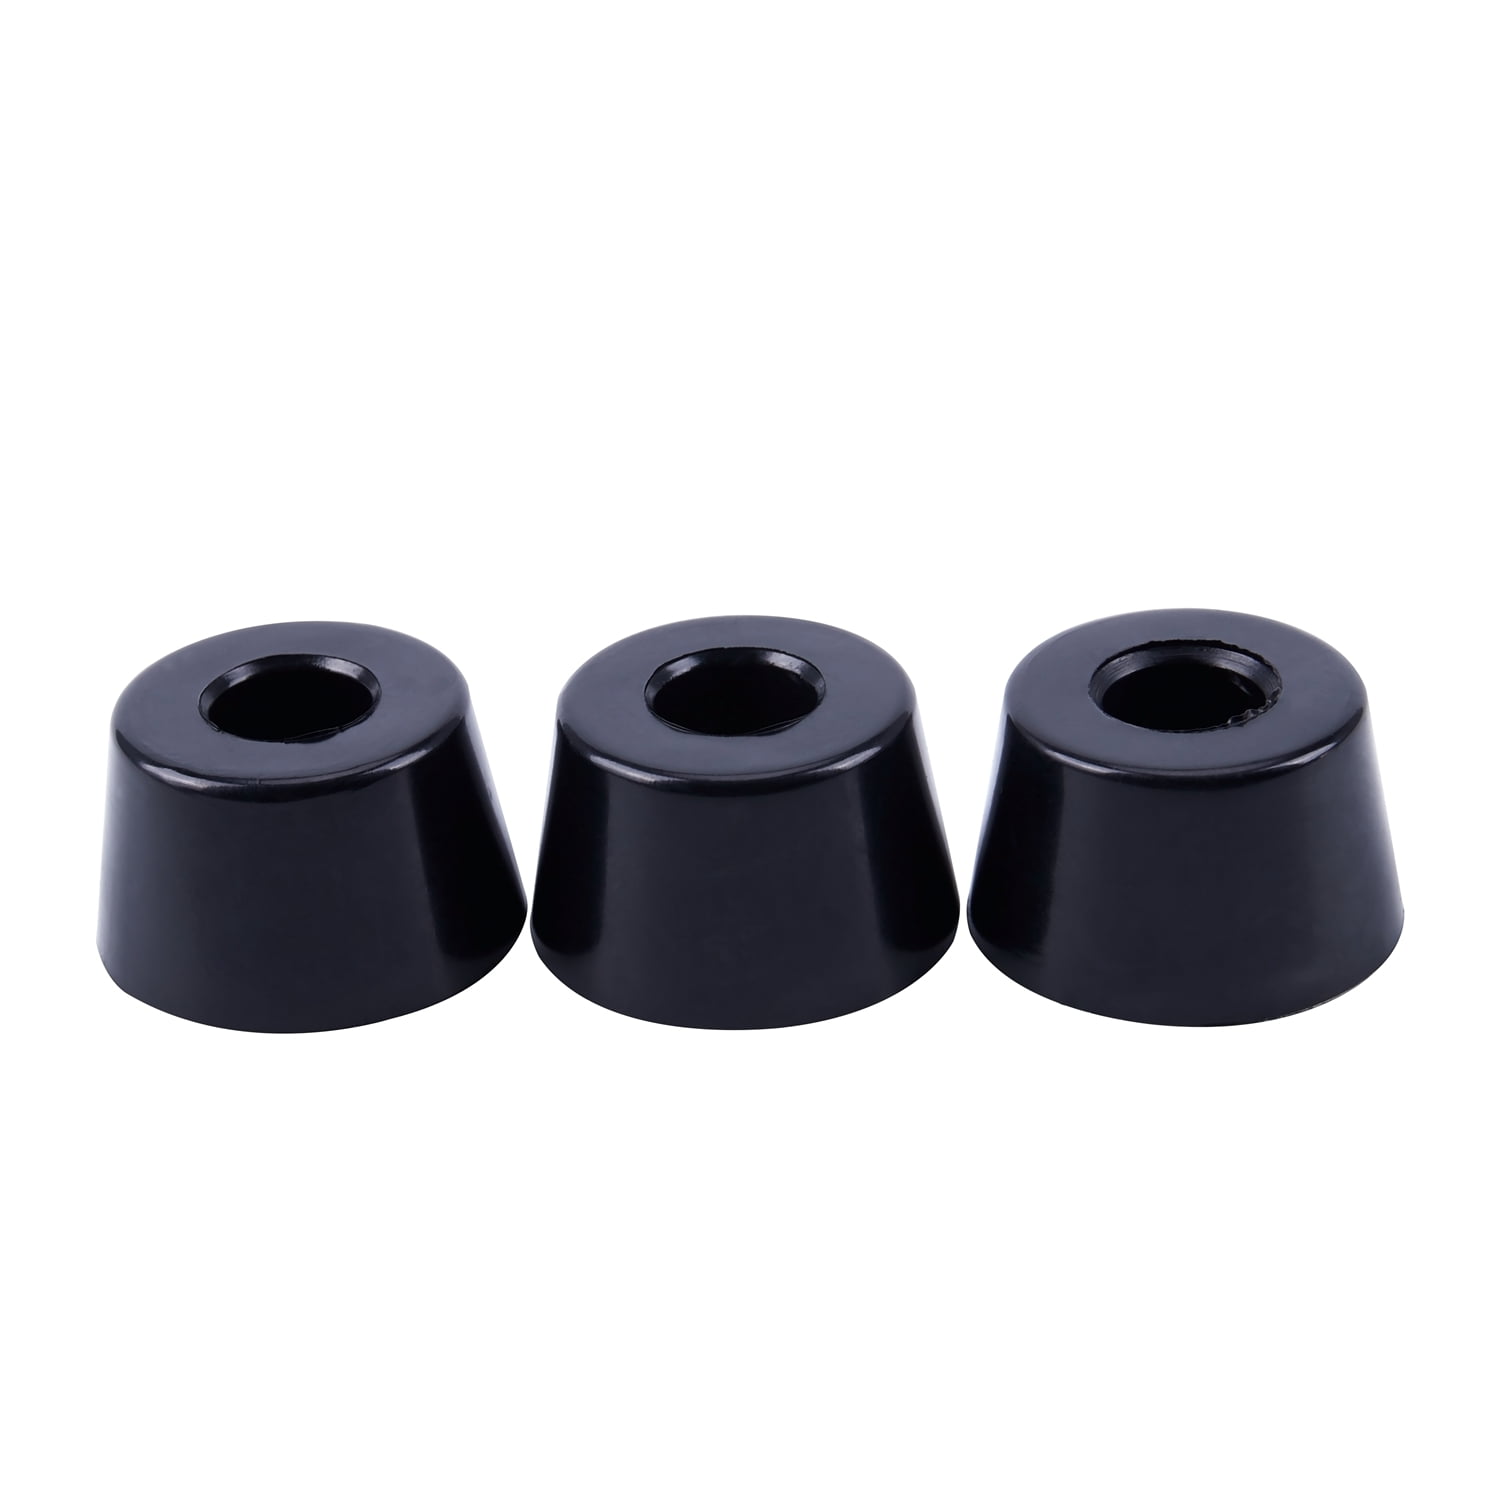 3 Sizes 4 Round Rocker Tip Glides for Hollow Chair & Table Furniture Legs 